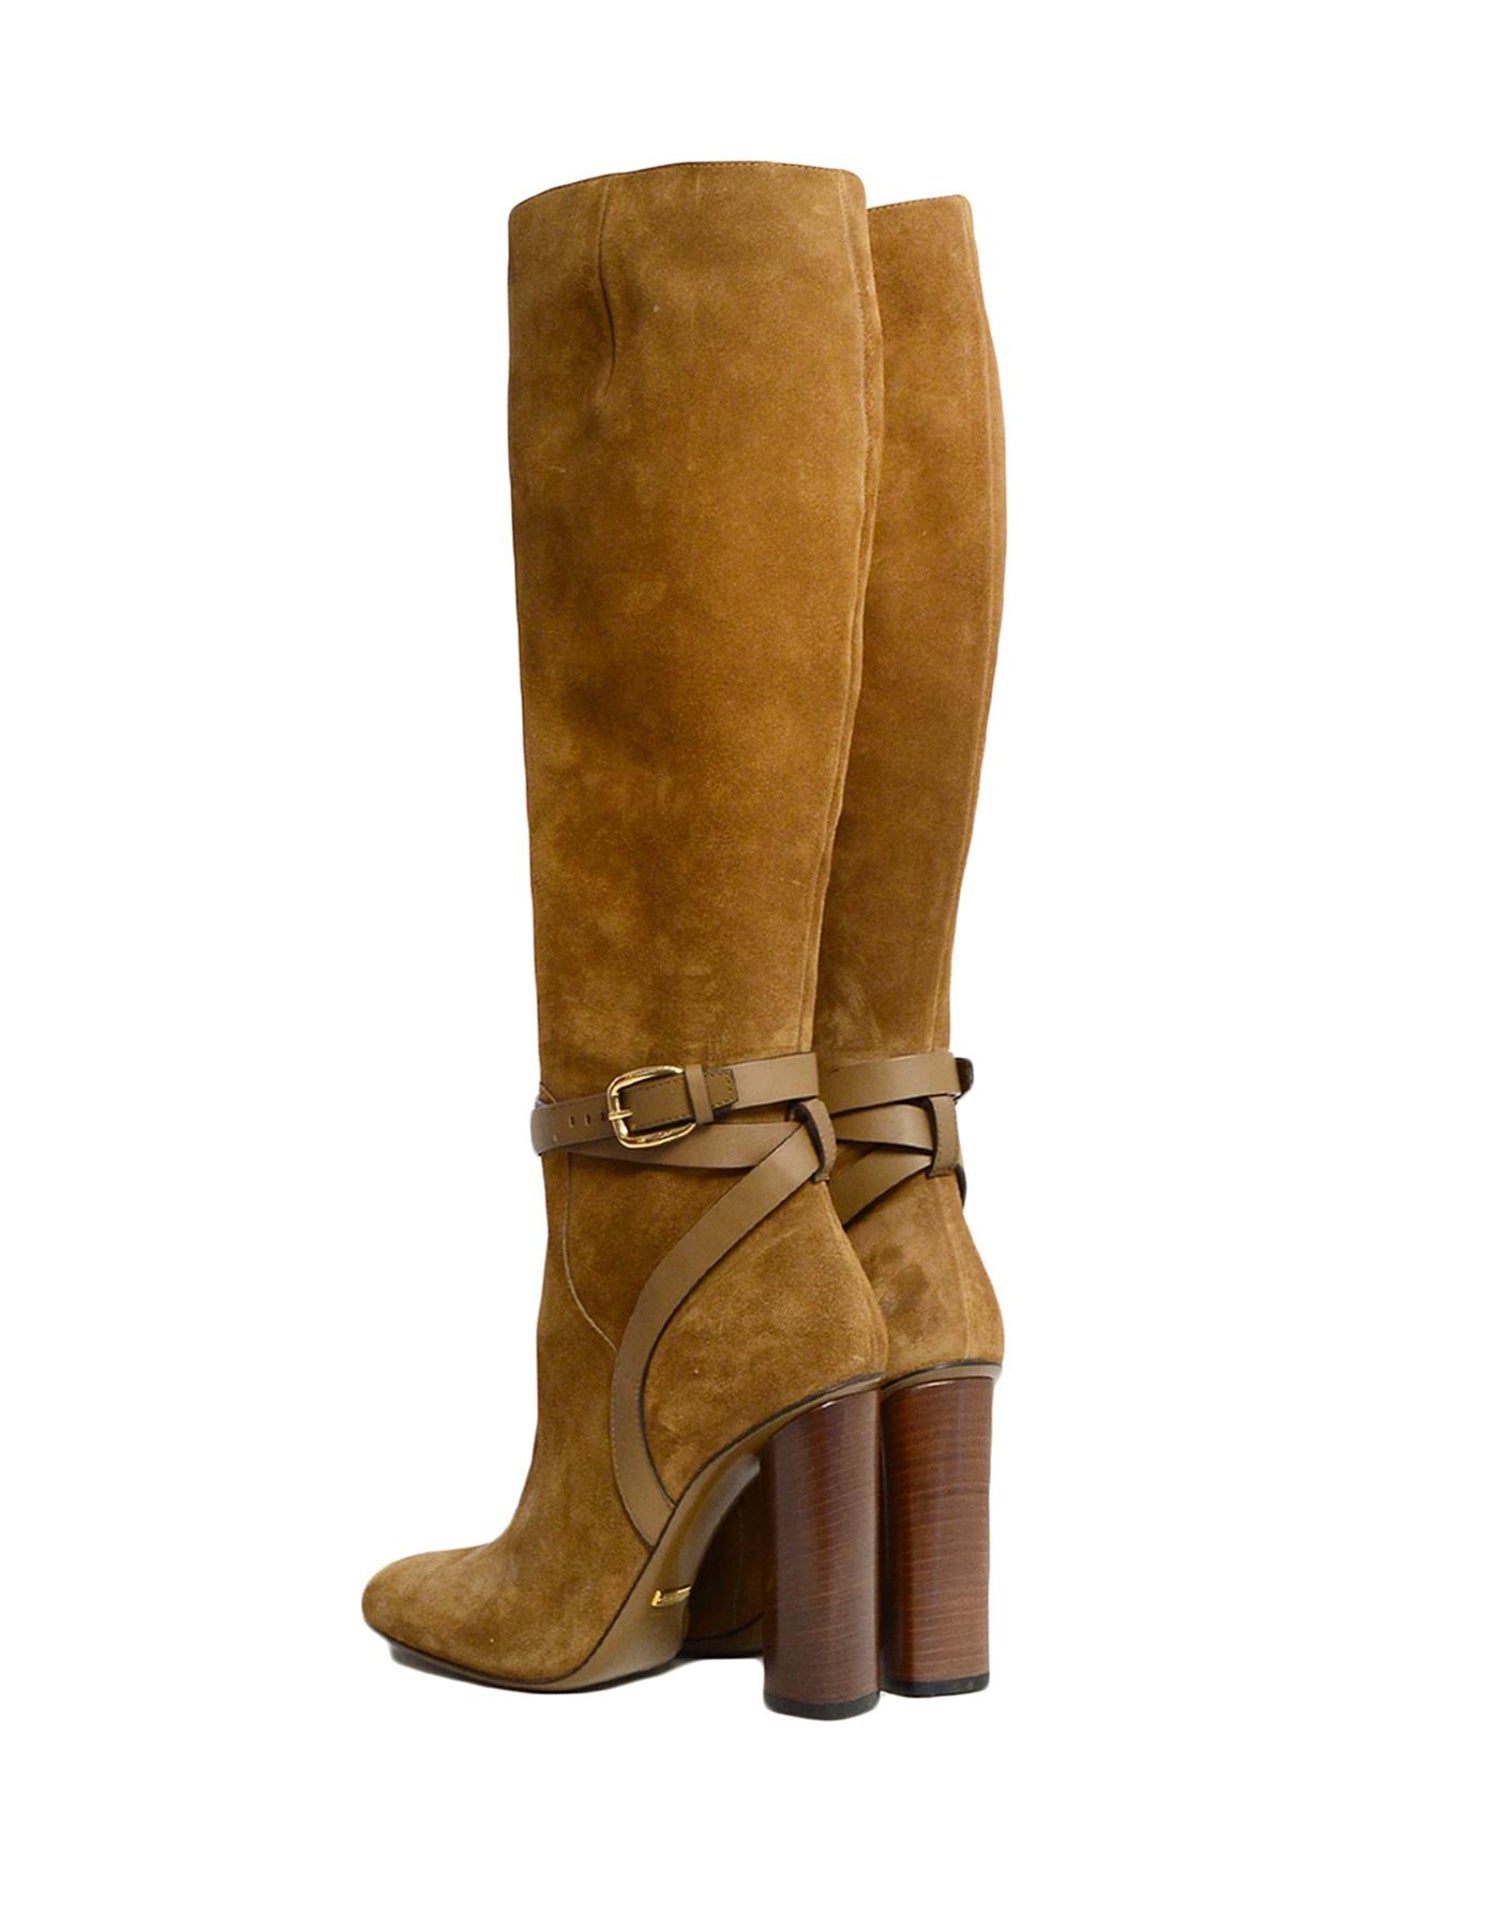 Gucci Tan New Marron Glace Knee-High Boots w/ Ankle Strap sz 39 rt $1,495  at 1stDibs | gucci glaces